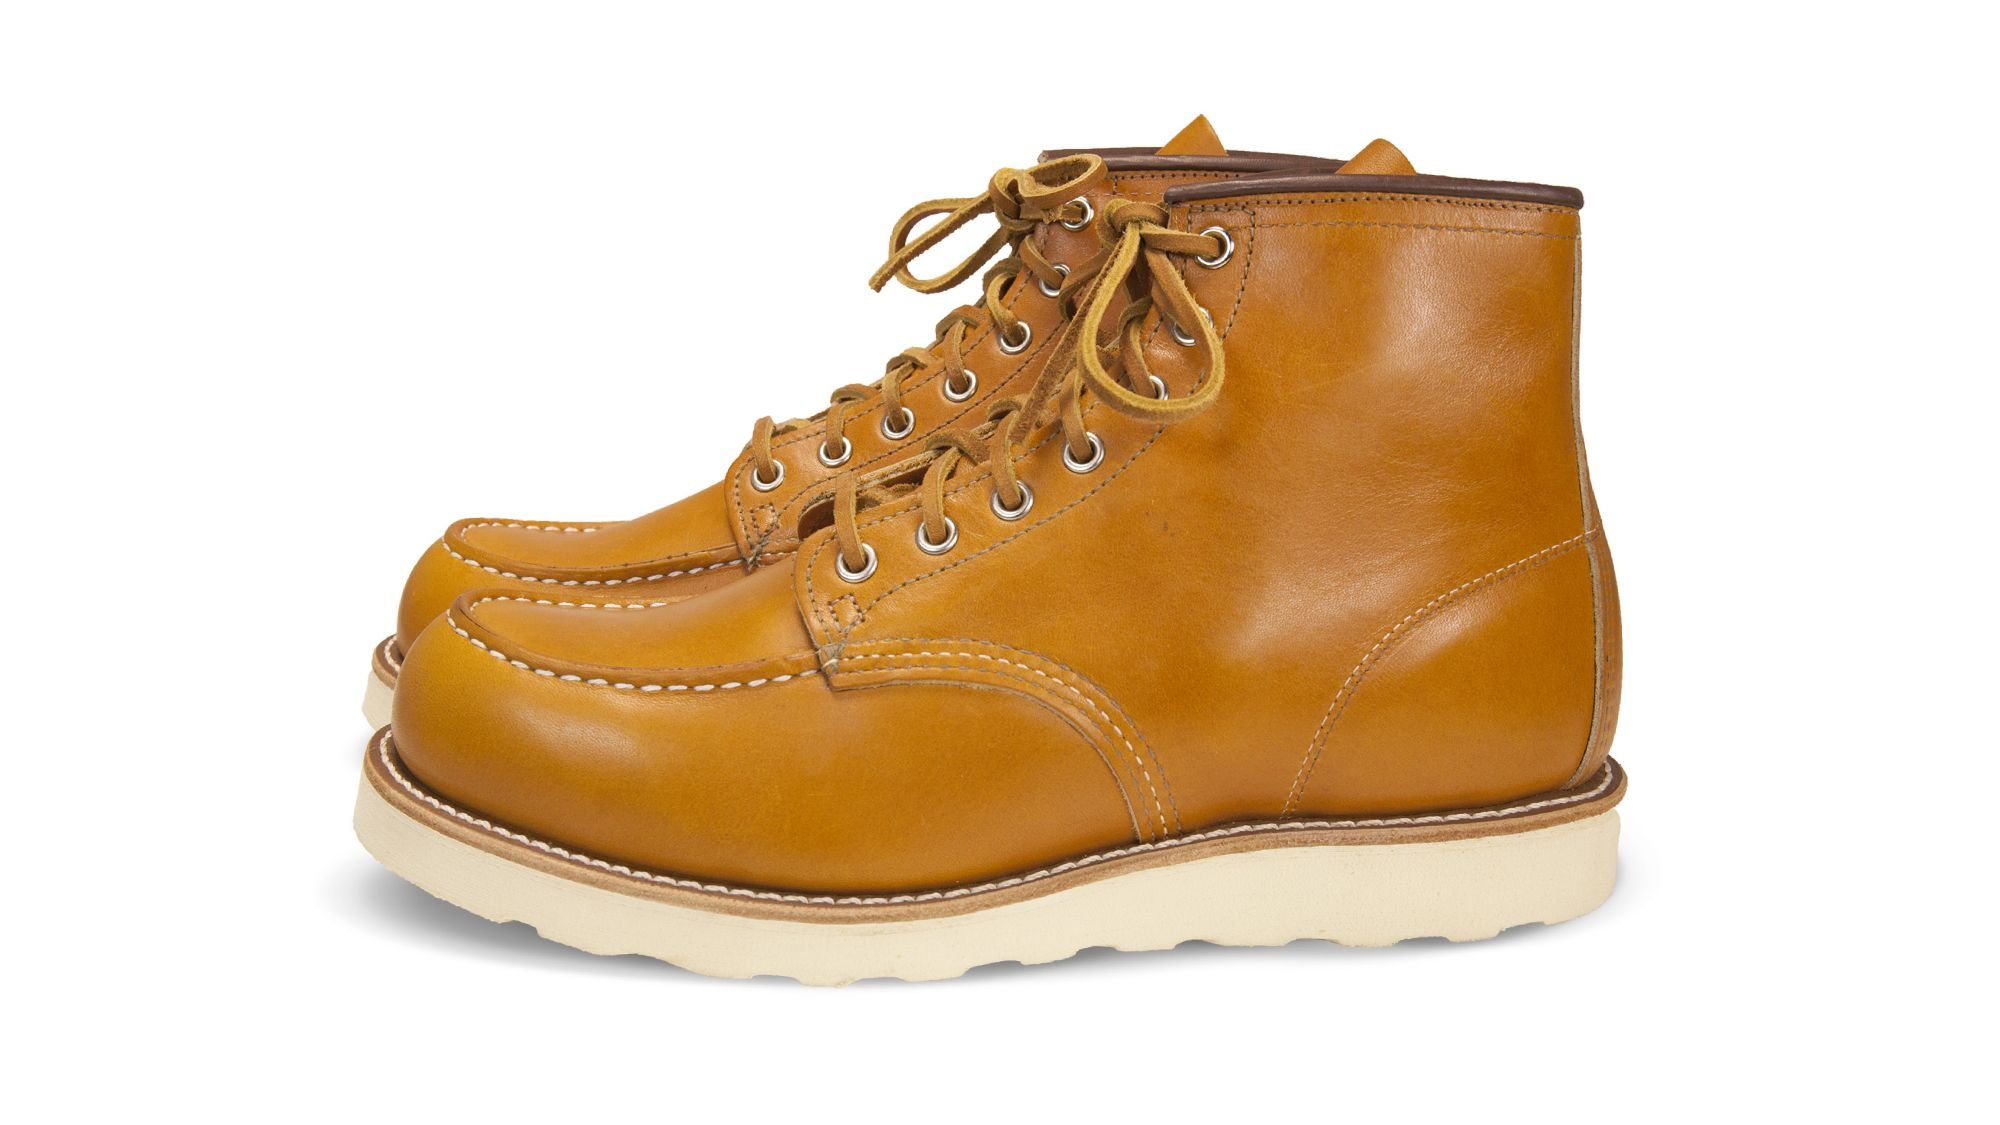 Shop the Moc Toe 8875 | Official Red Wing Shoes Online Store